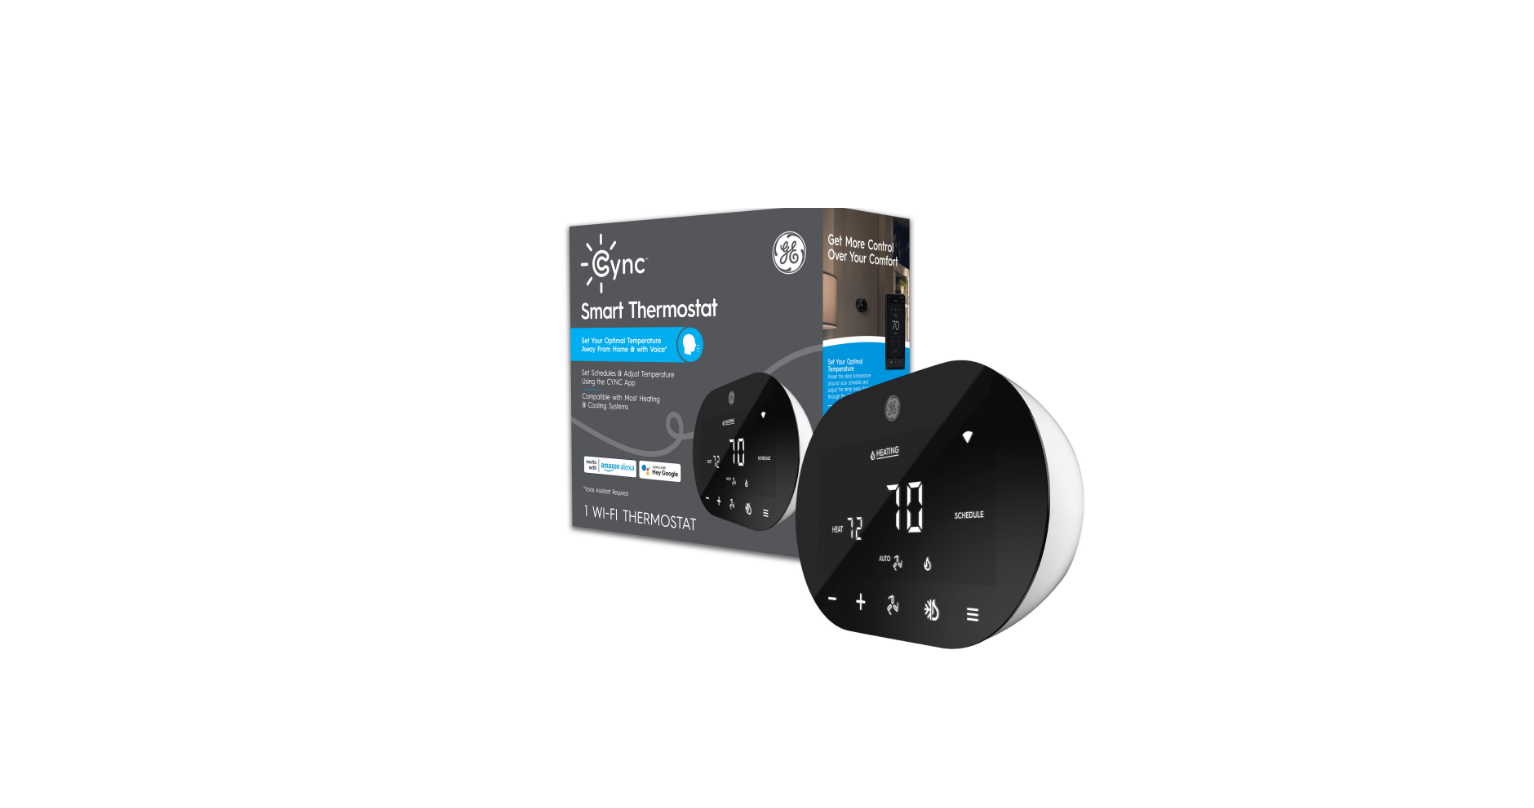 GE APPLIANCES Cync Smart Thermostat En Route Installation Guide